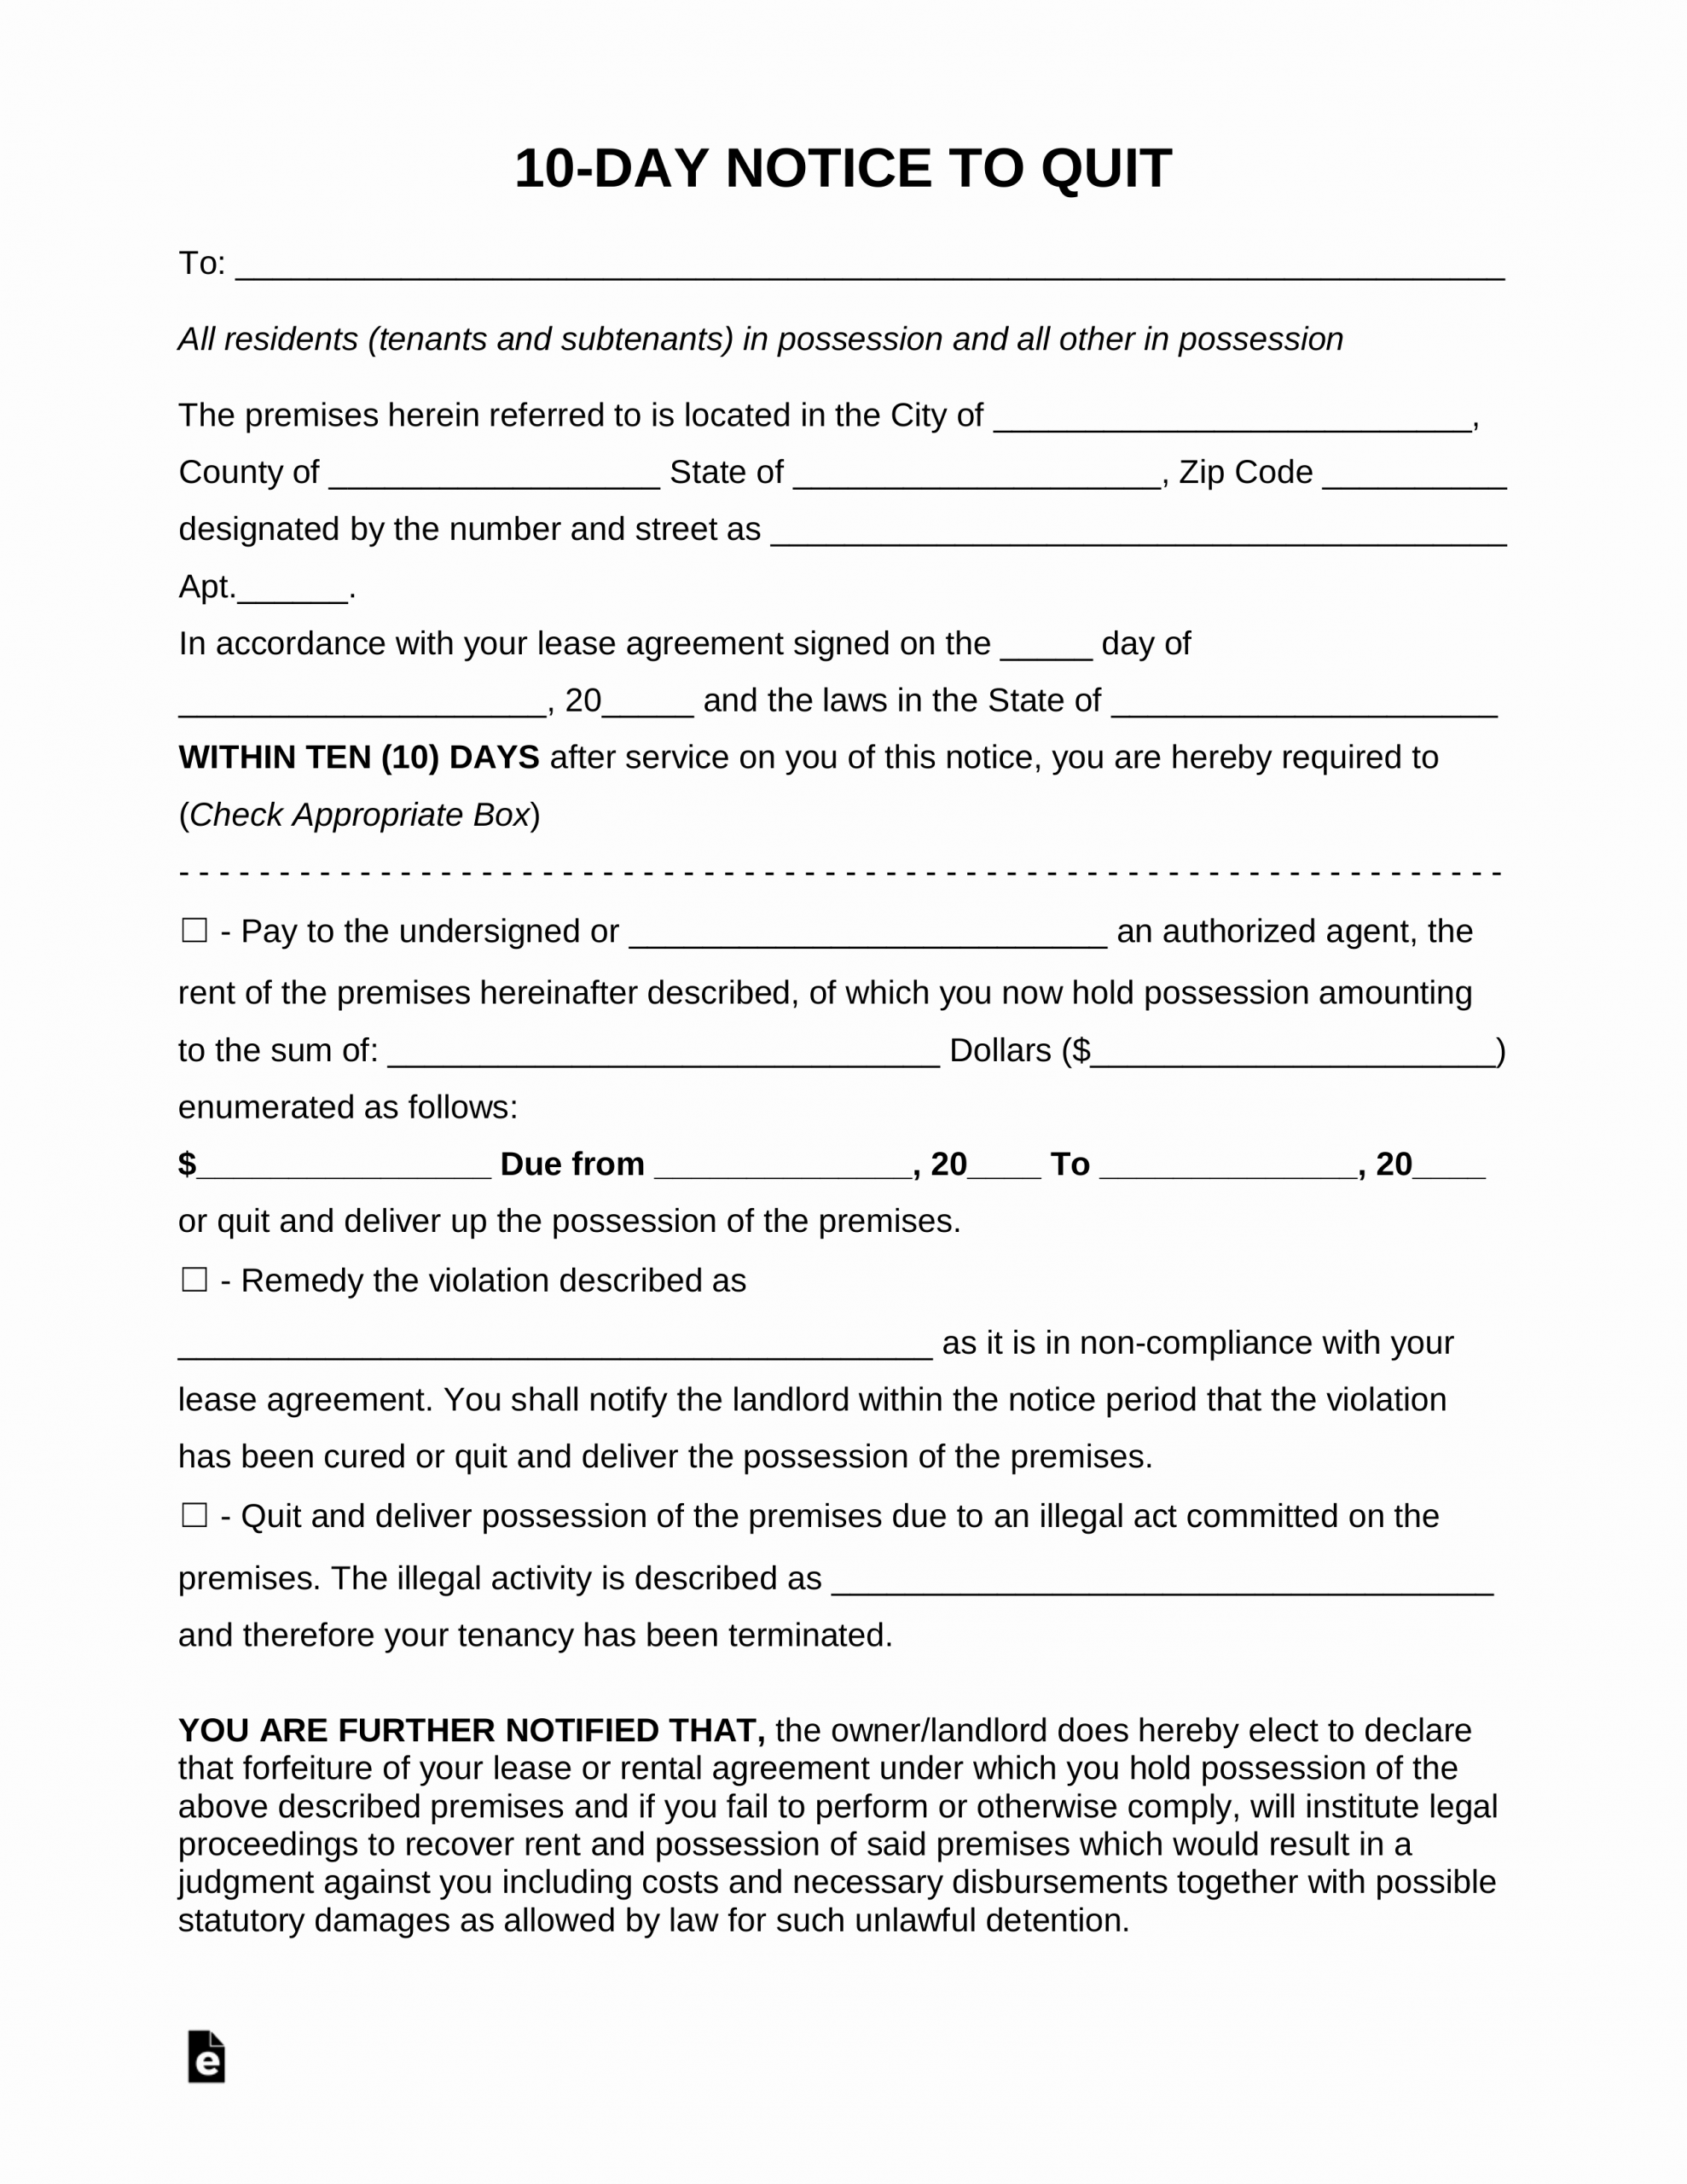 Oregon 30 Day Eviction Notice Template Awesome Free Ten 10 Day Eviction Notice Template Pdf